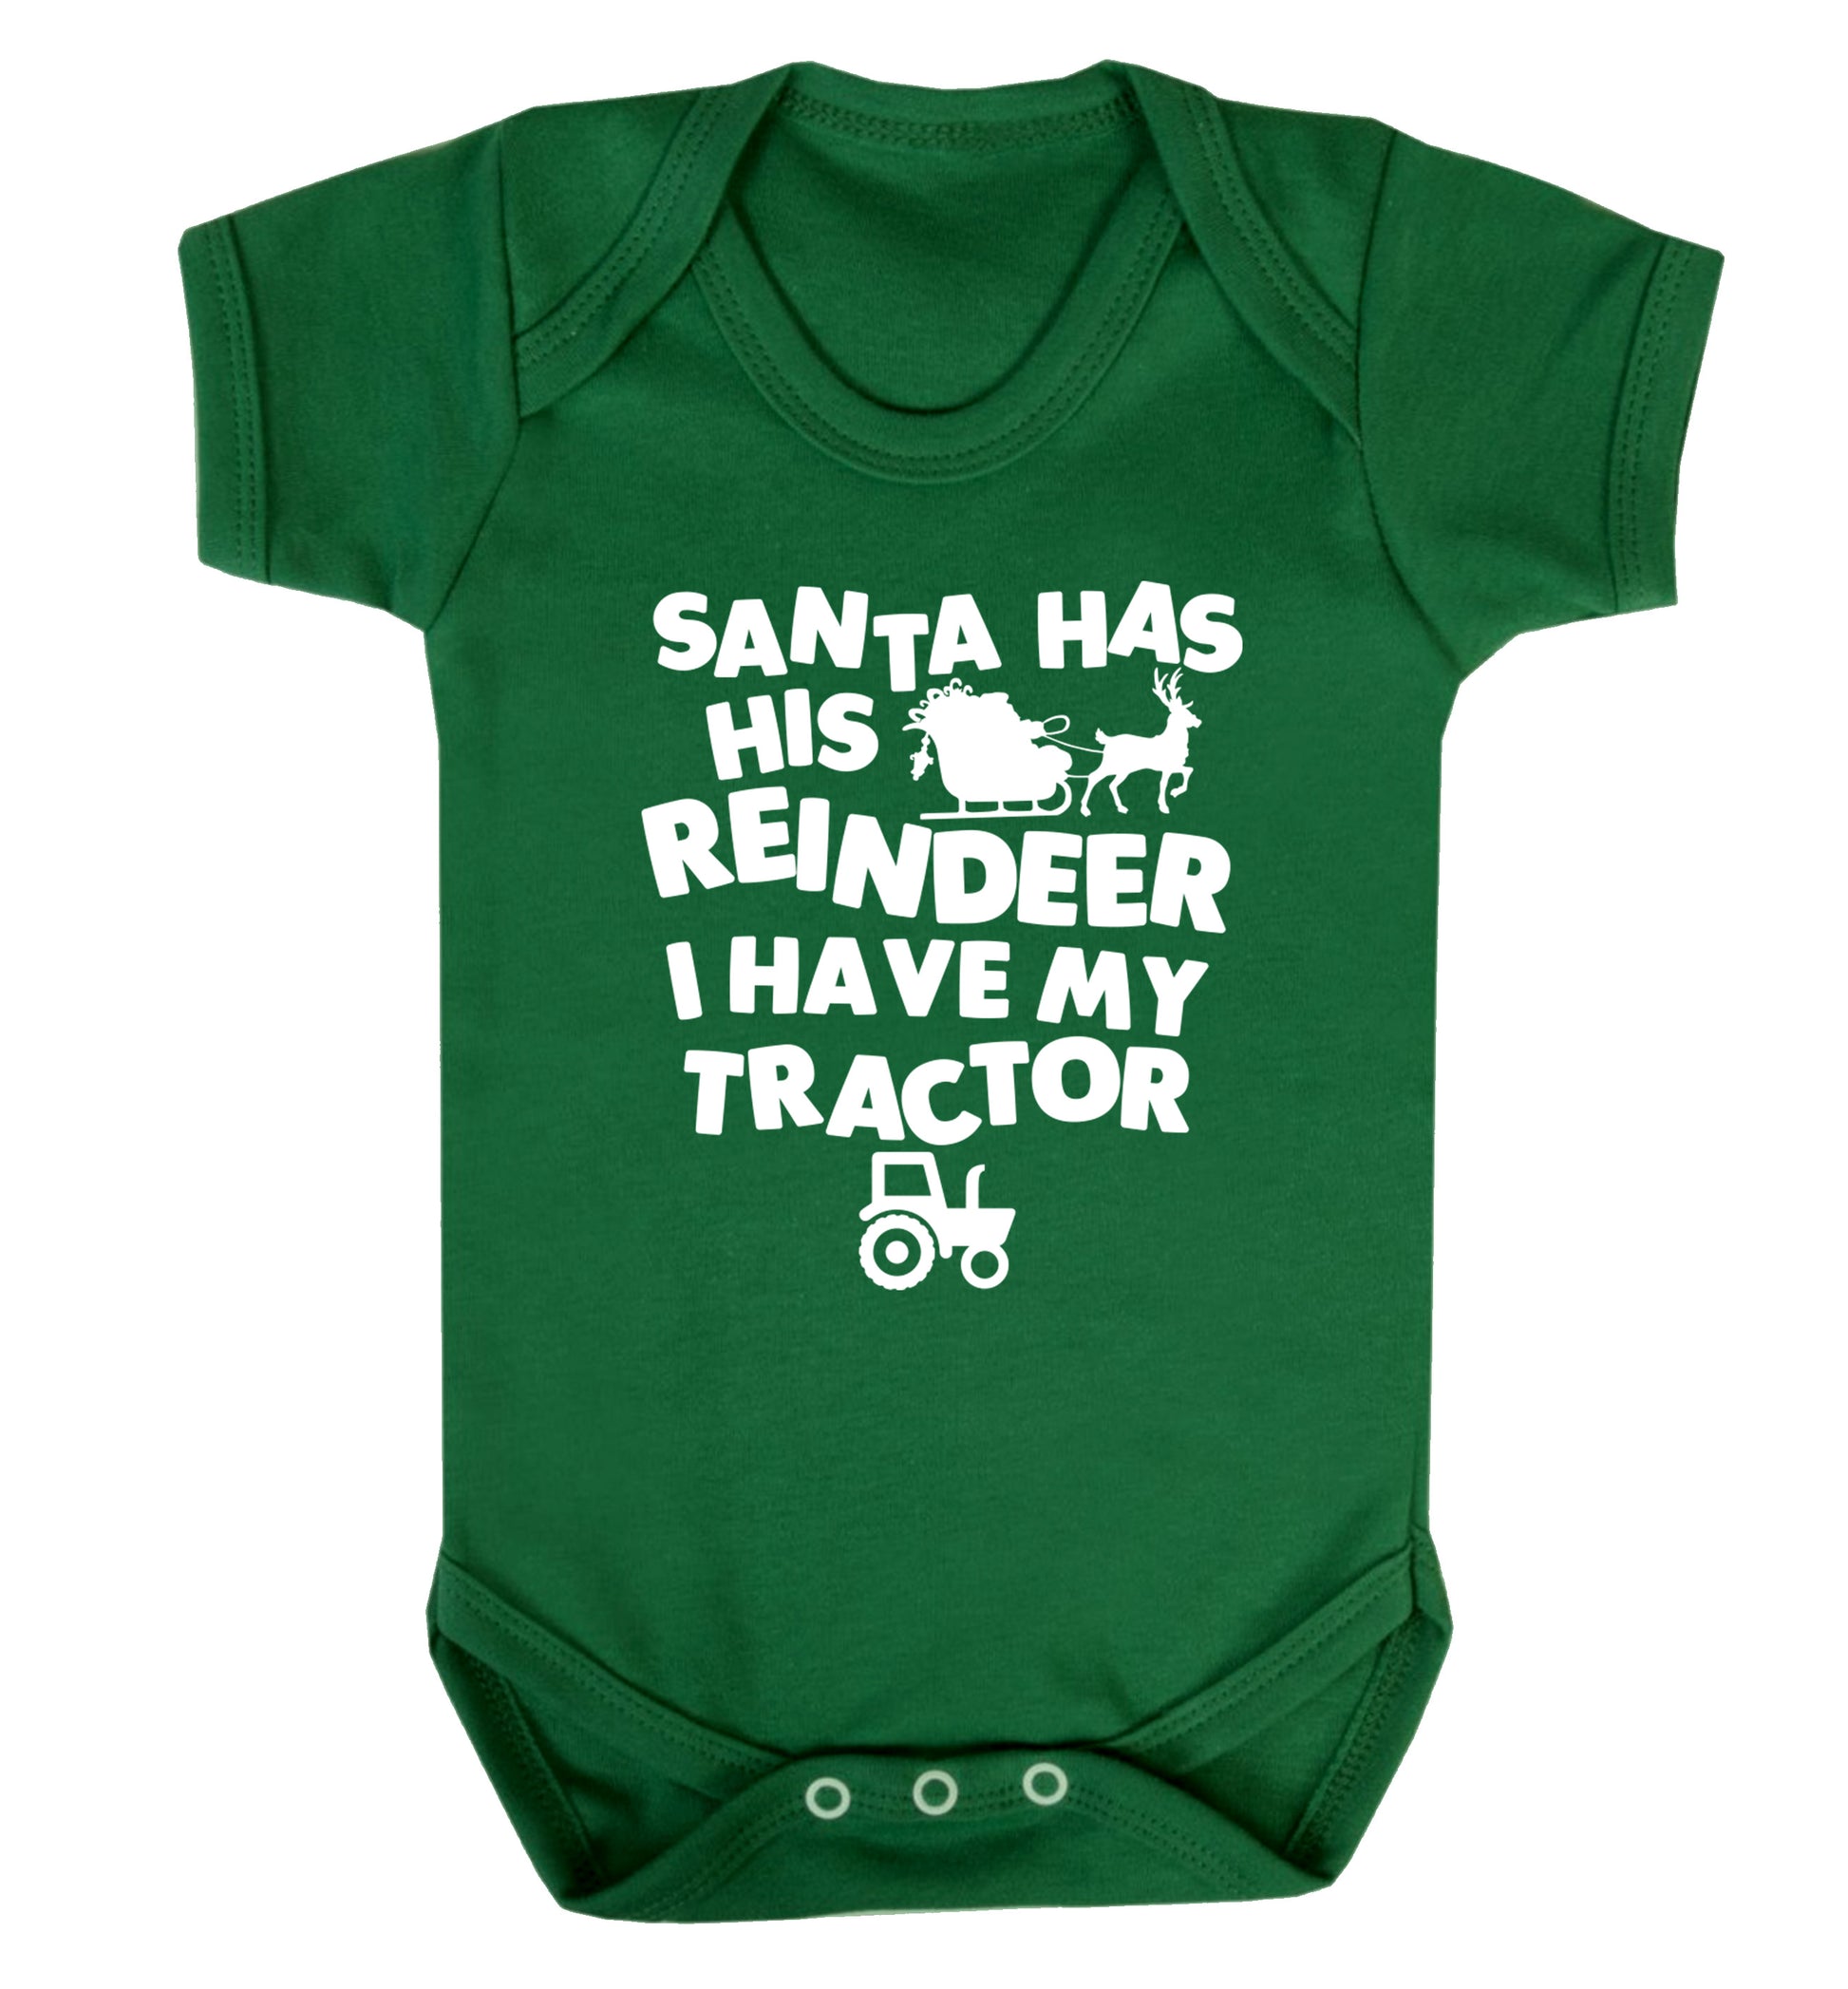 Santa has his reindeer I have my tractor Baby Vest green 18-24 months